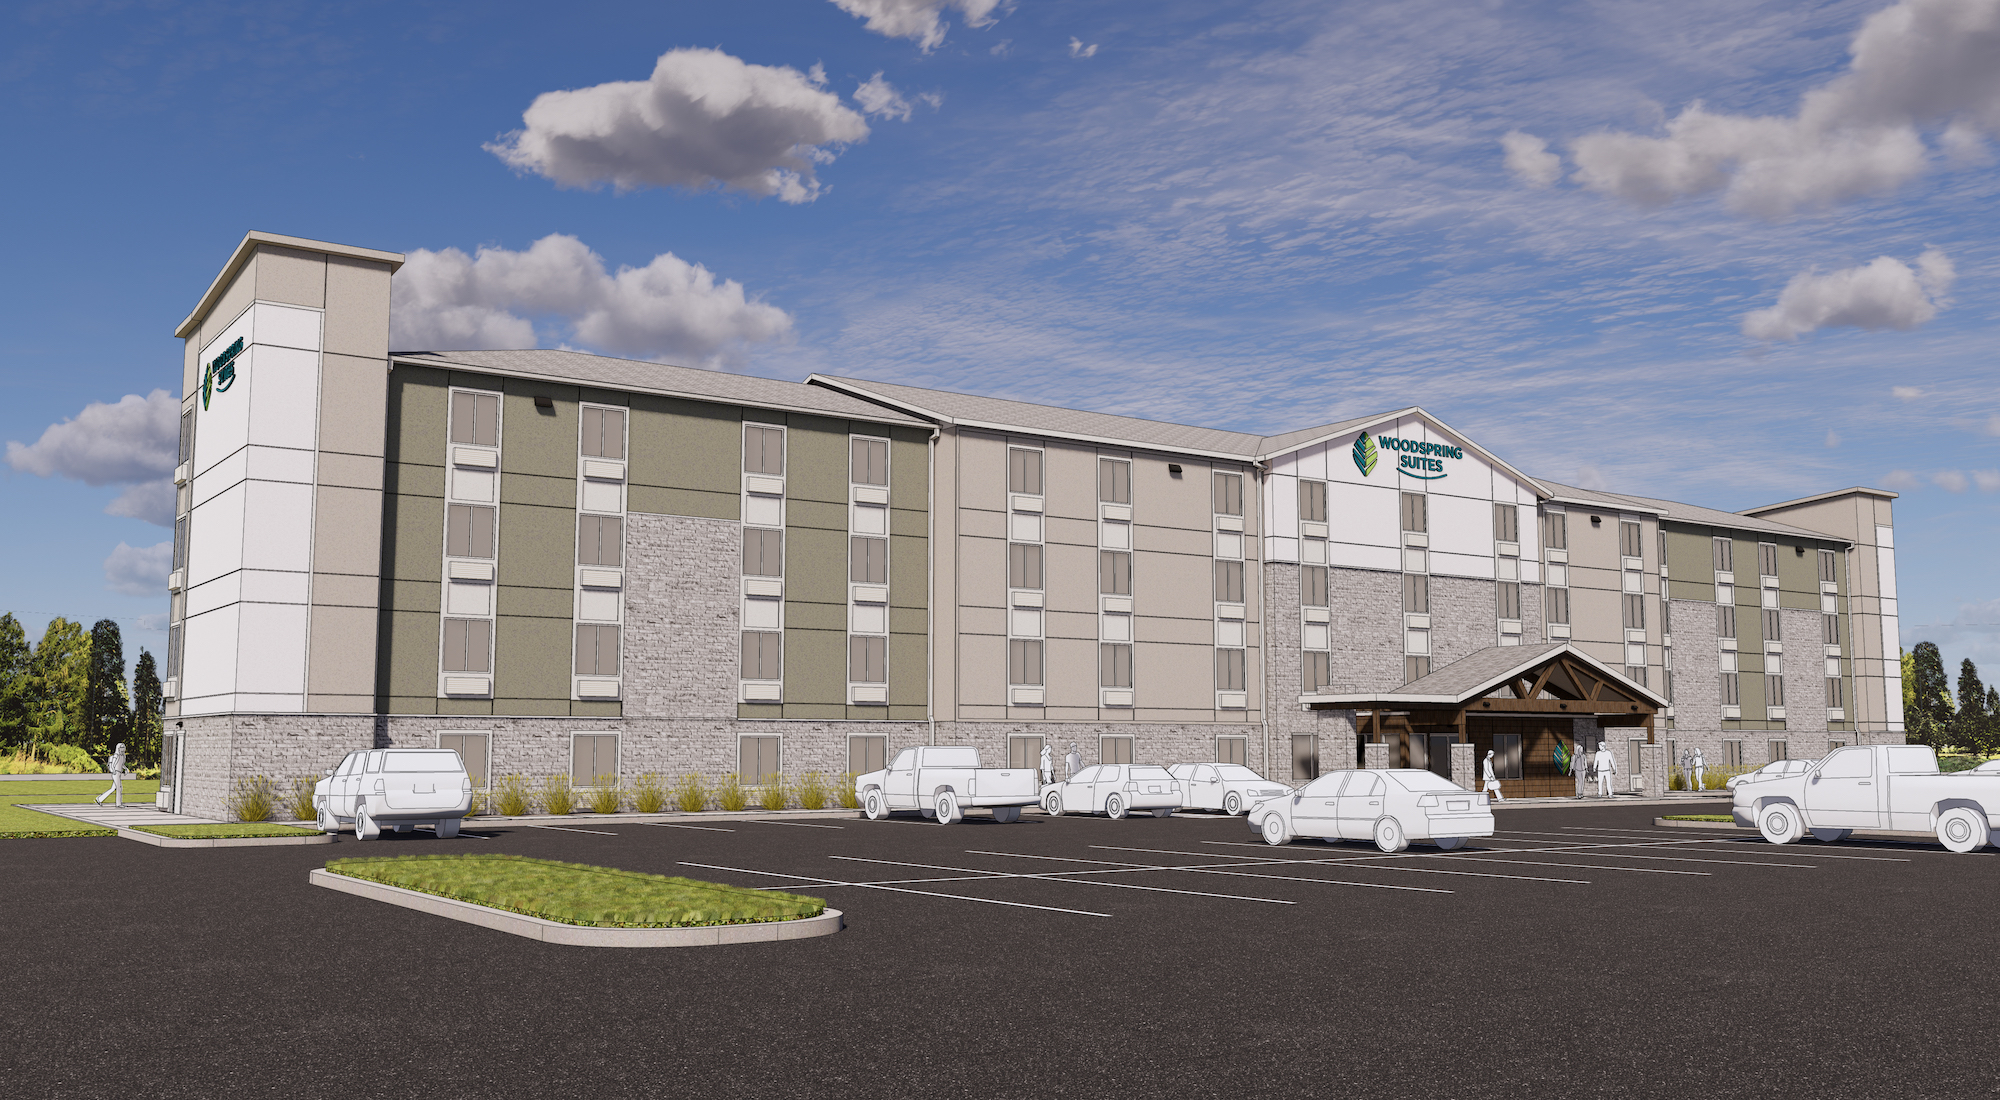 Sandpiper Hospitality has signed a third party management contract with Liberty Investment Properties, Inc. for a new WoodSpring Suites in Charlotte, N.C.